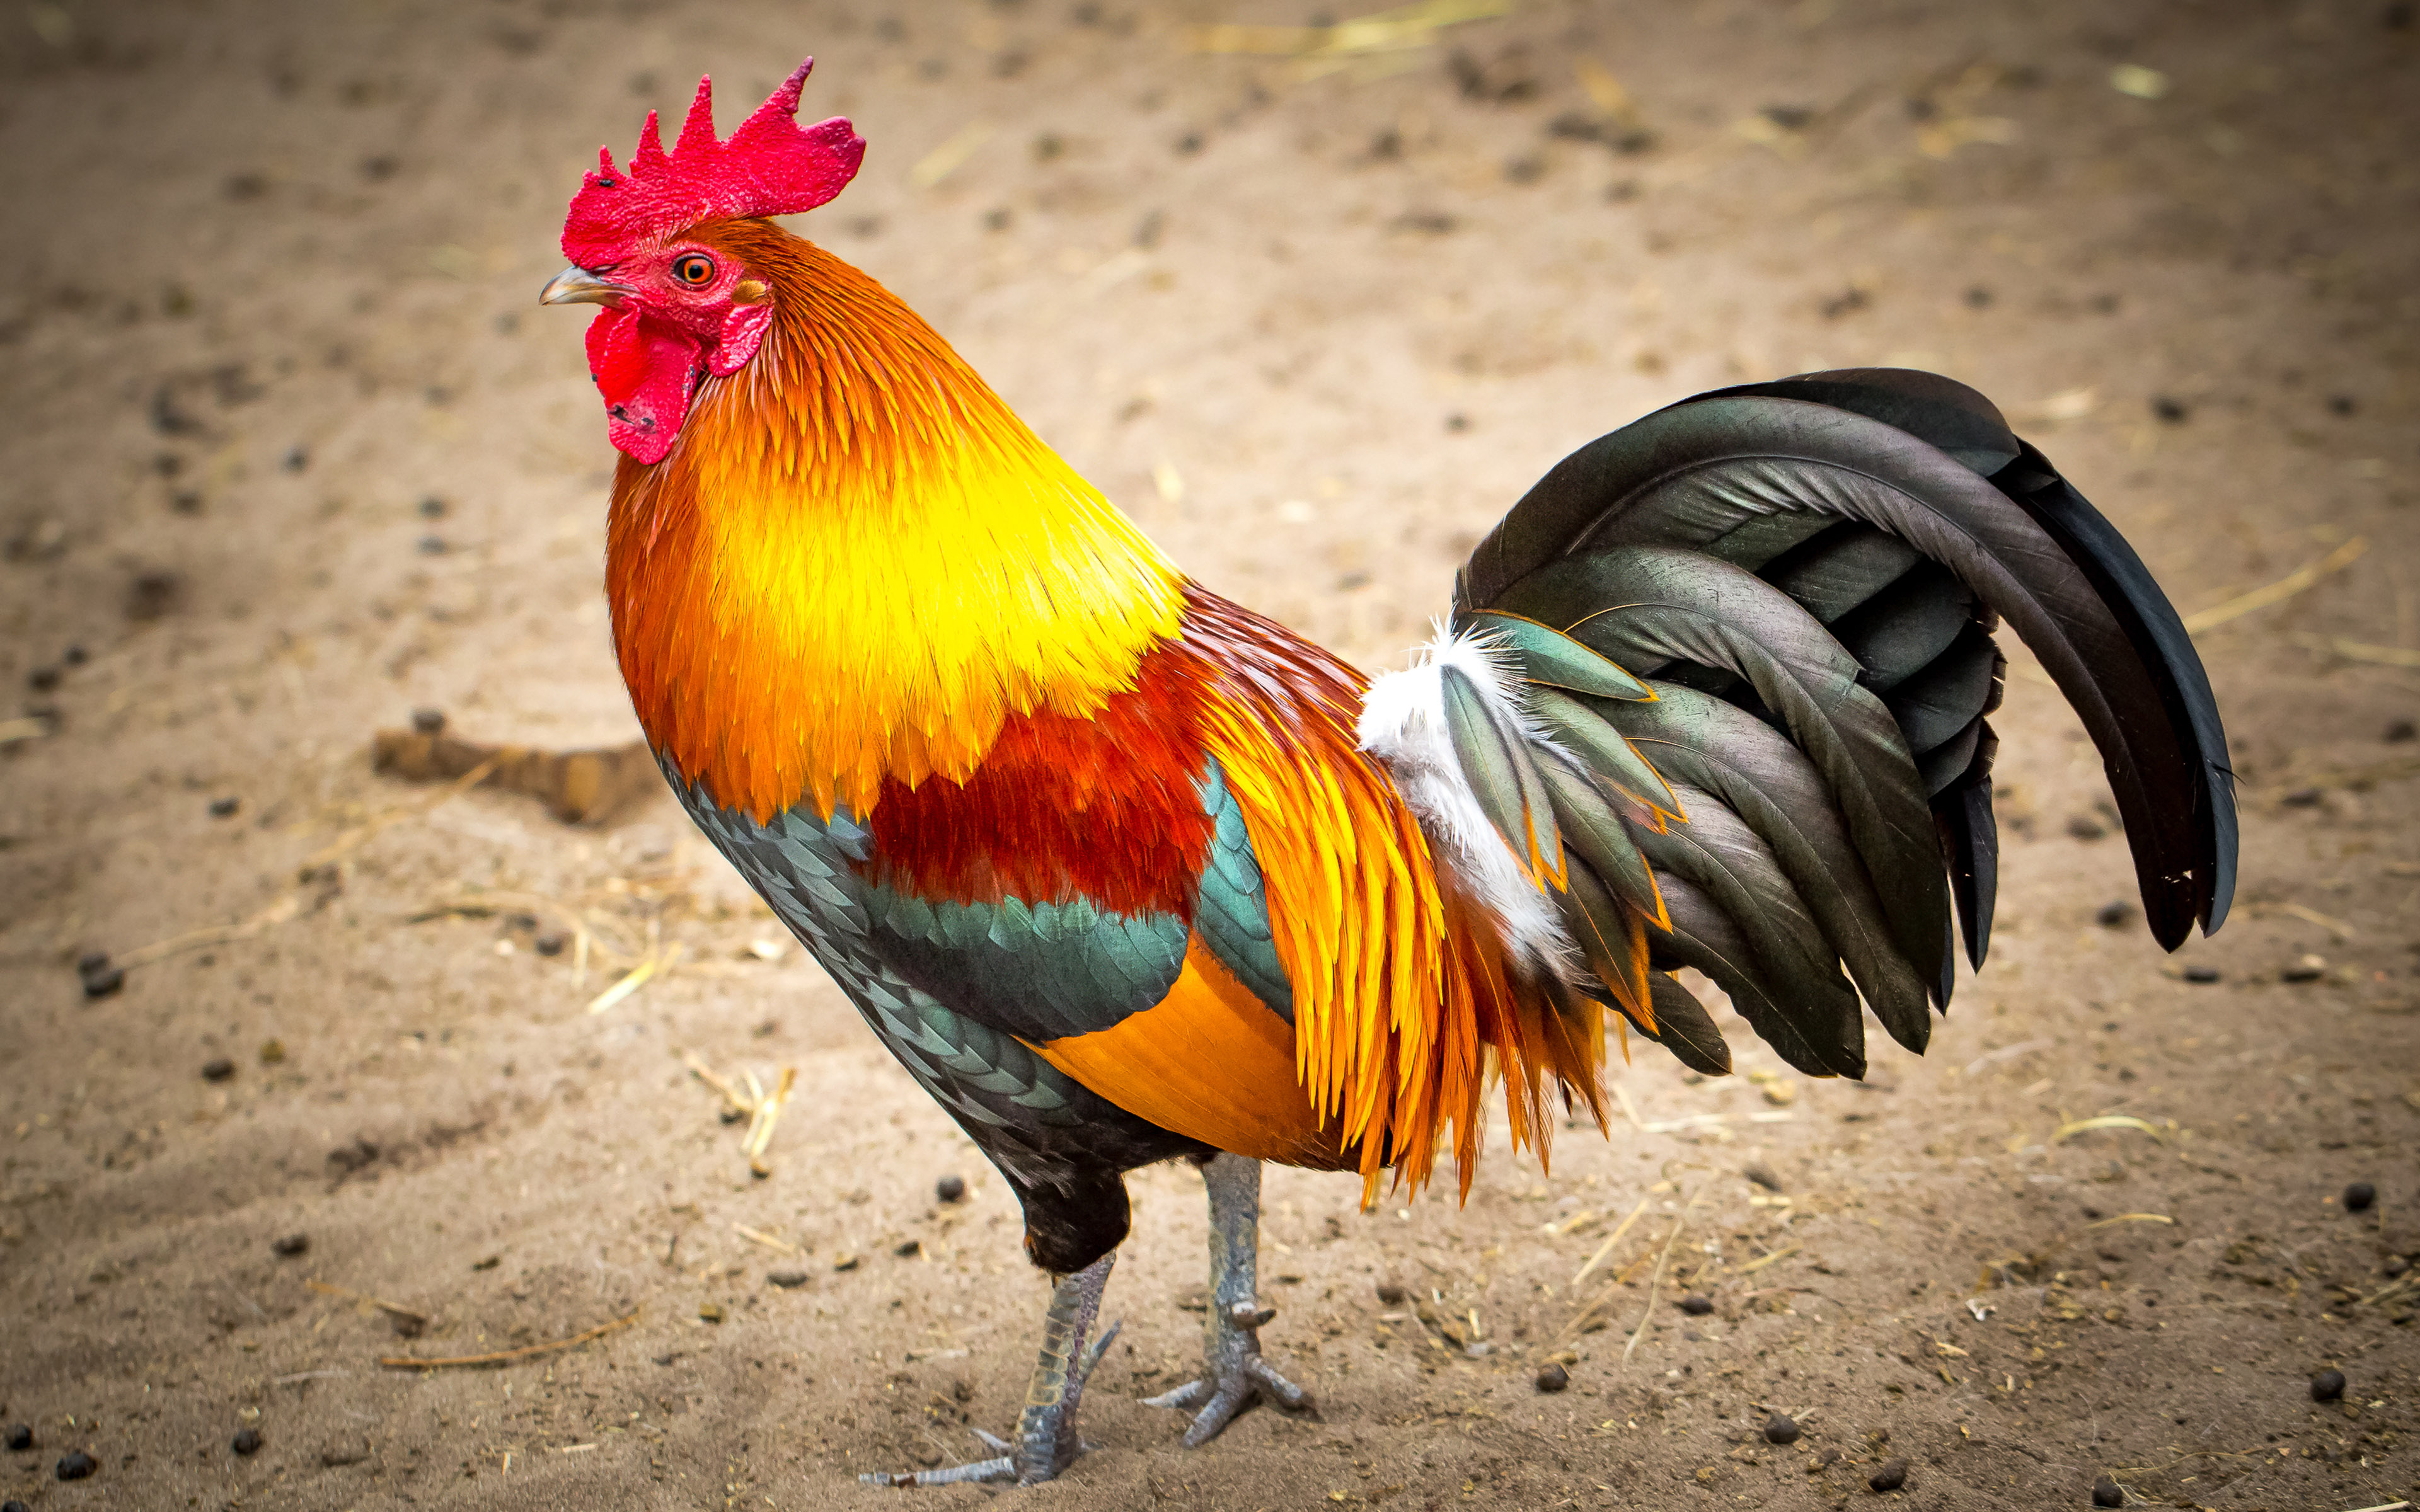 Rooster With Beautiful Colorful Feathers Reddish Orange Neck Blue Gray